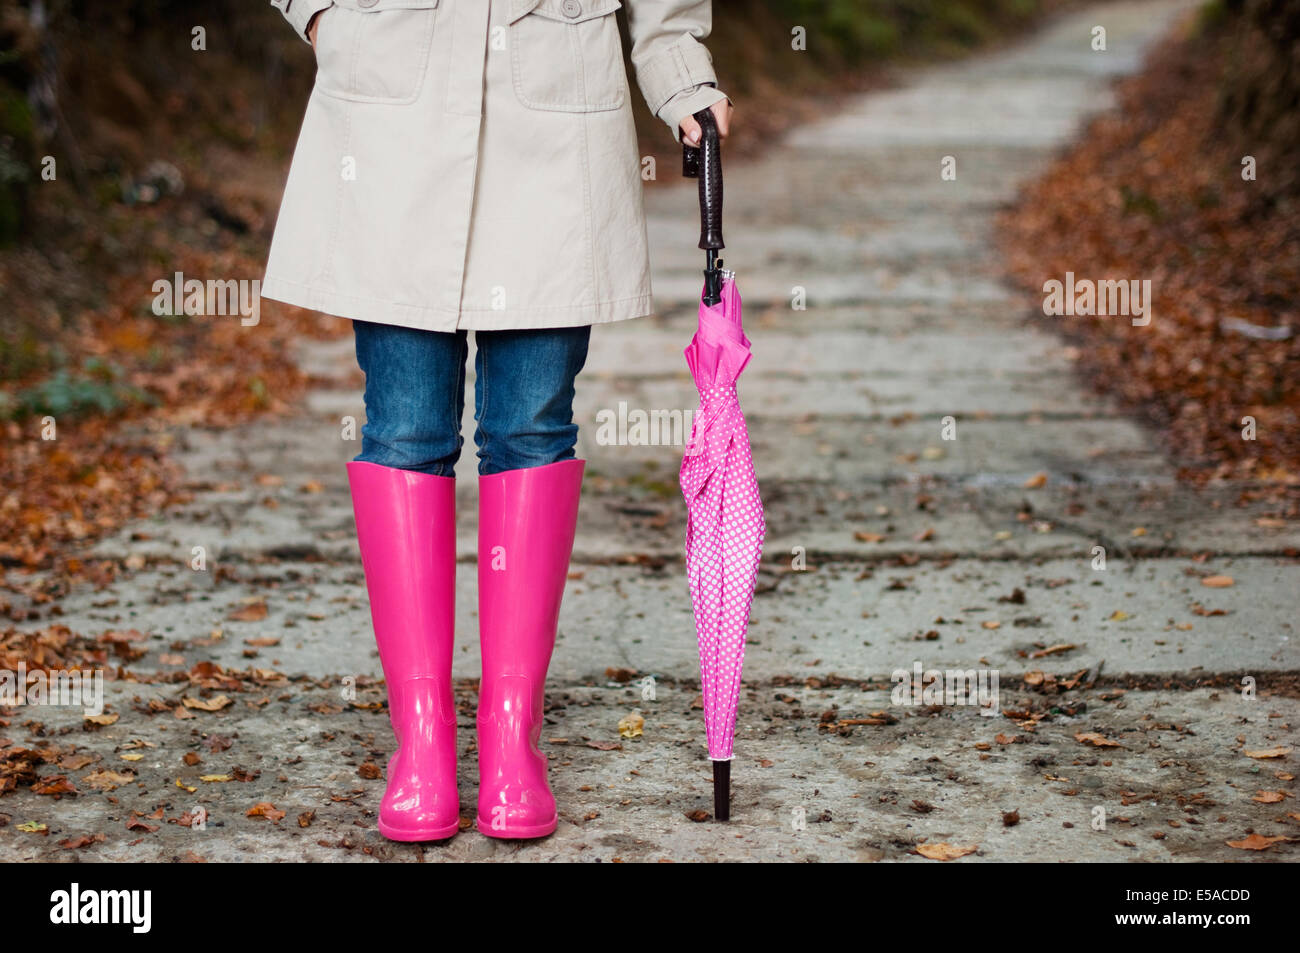 Woman with umbrella wearing rubber boots, Debica, Poland. Stock Photo